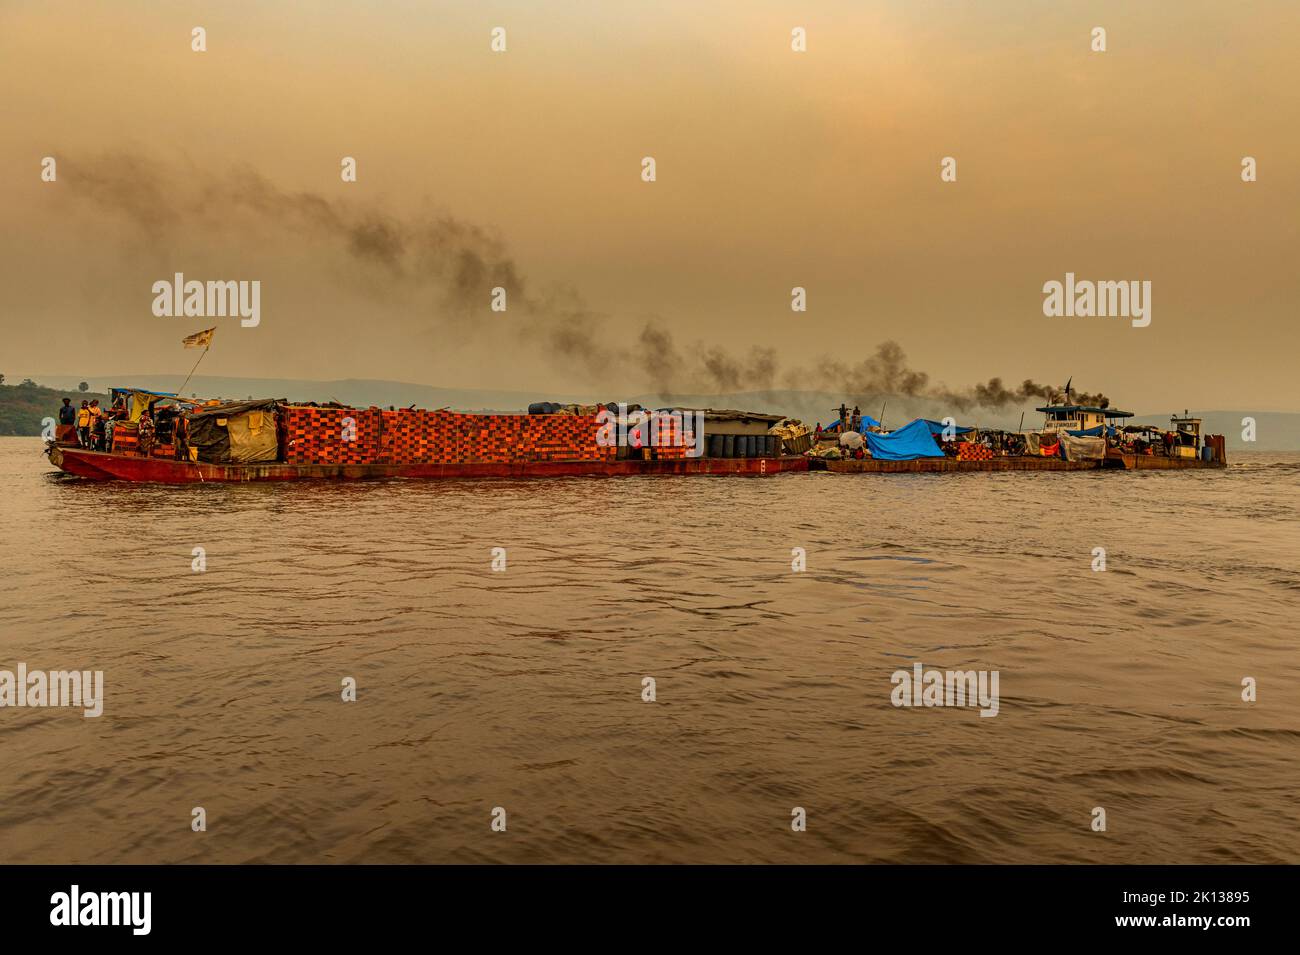 Overloaded riverboat on the Congo River at sunset, Democratic Republic of the Congo, Africa Stock Photo